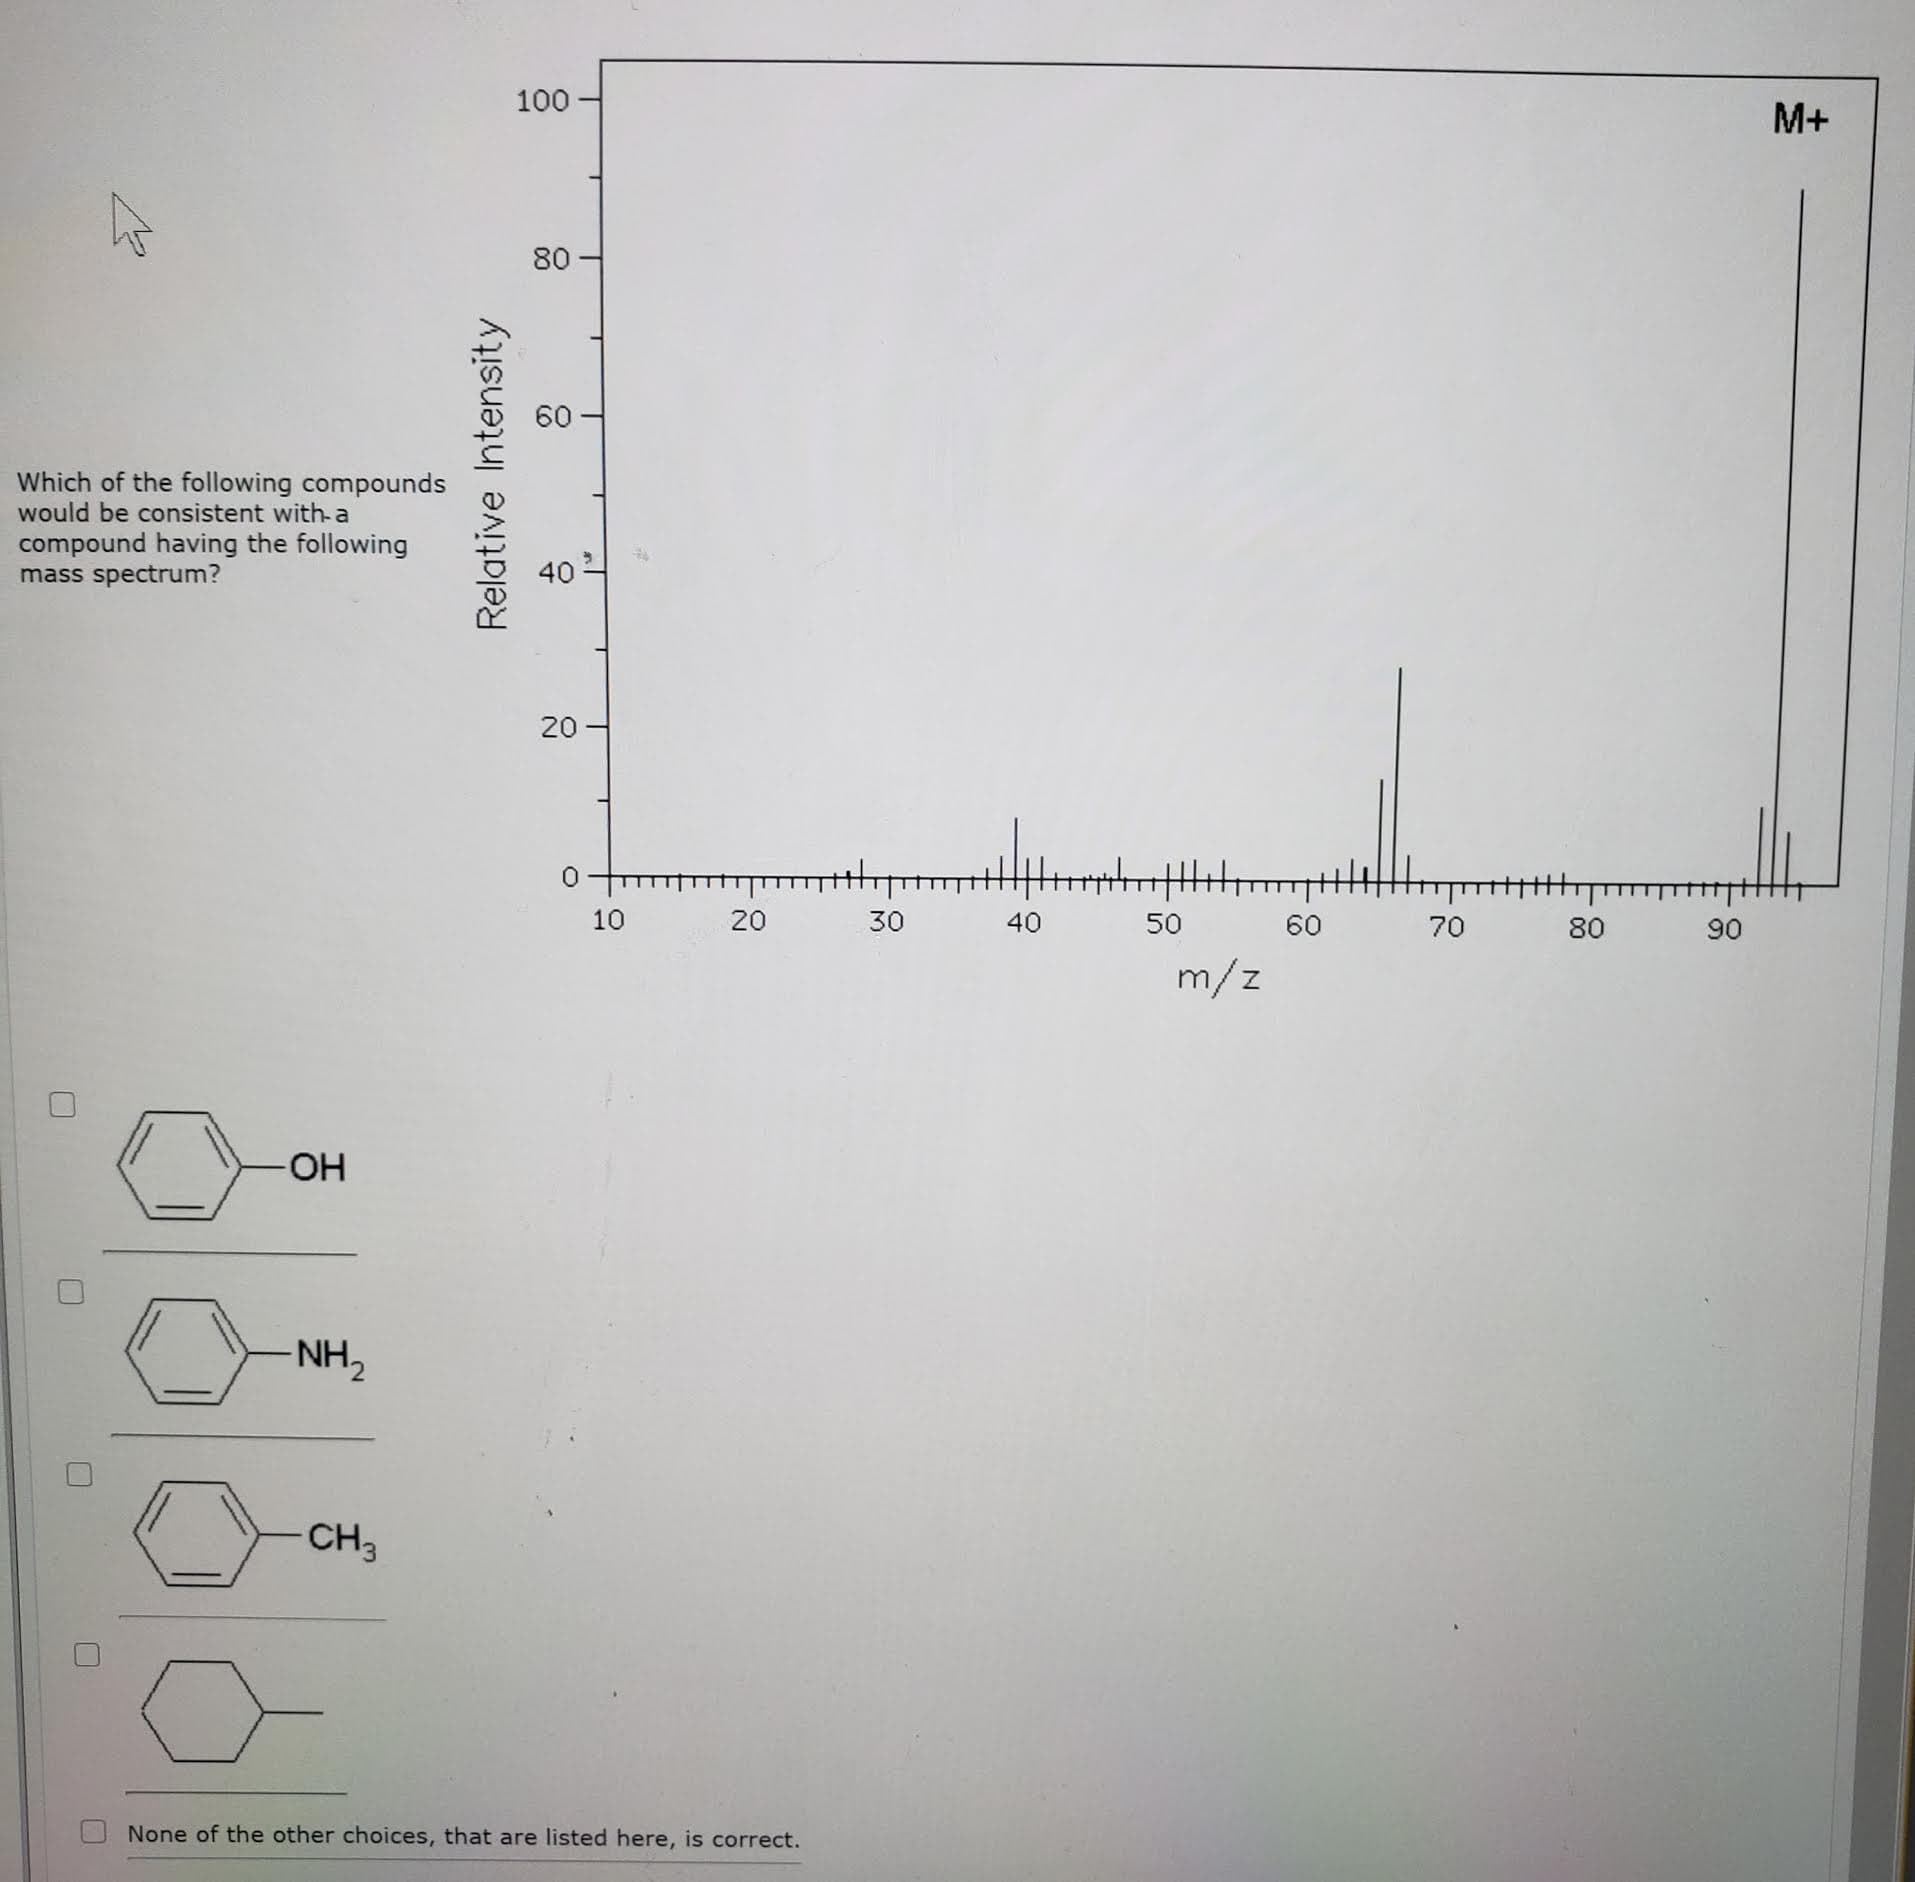 100
M+
80
Which of the following compounds
would be consistent with-a
compound having the following
mass spectrum?
40
10
20
30
40
50
60
70
80
90
m/z
OH
NH,
CH3
None of the other choices, that are listed bere is correct
Relative Intensity
20
